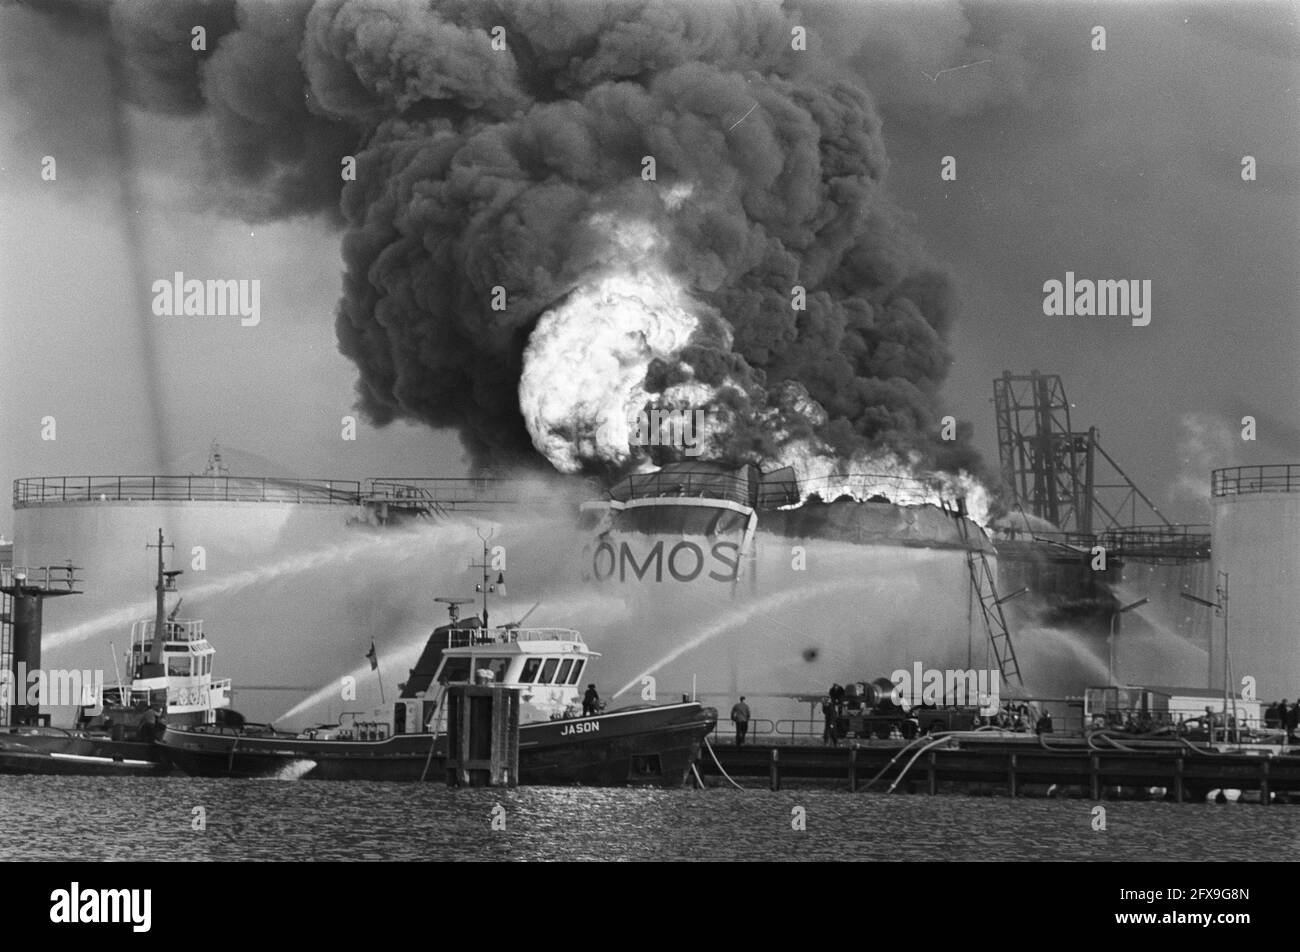 Fire at Comos in the Petroleumhaven Amsterdam in a gasoline tank. Fireboats assisted in extinguishing the fire, November 20, 1969, fires, The Netherlands, 20th century press agency photo, news to remember, documentary, historic photography 1945-1990, visual stories, human history of the Twentieth Century, capturing moments in time Stock Photo